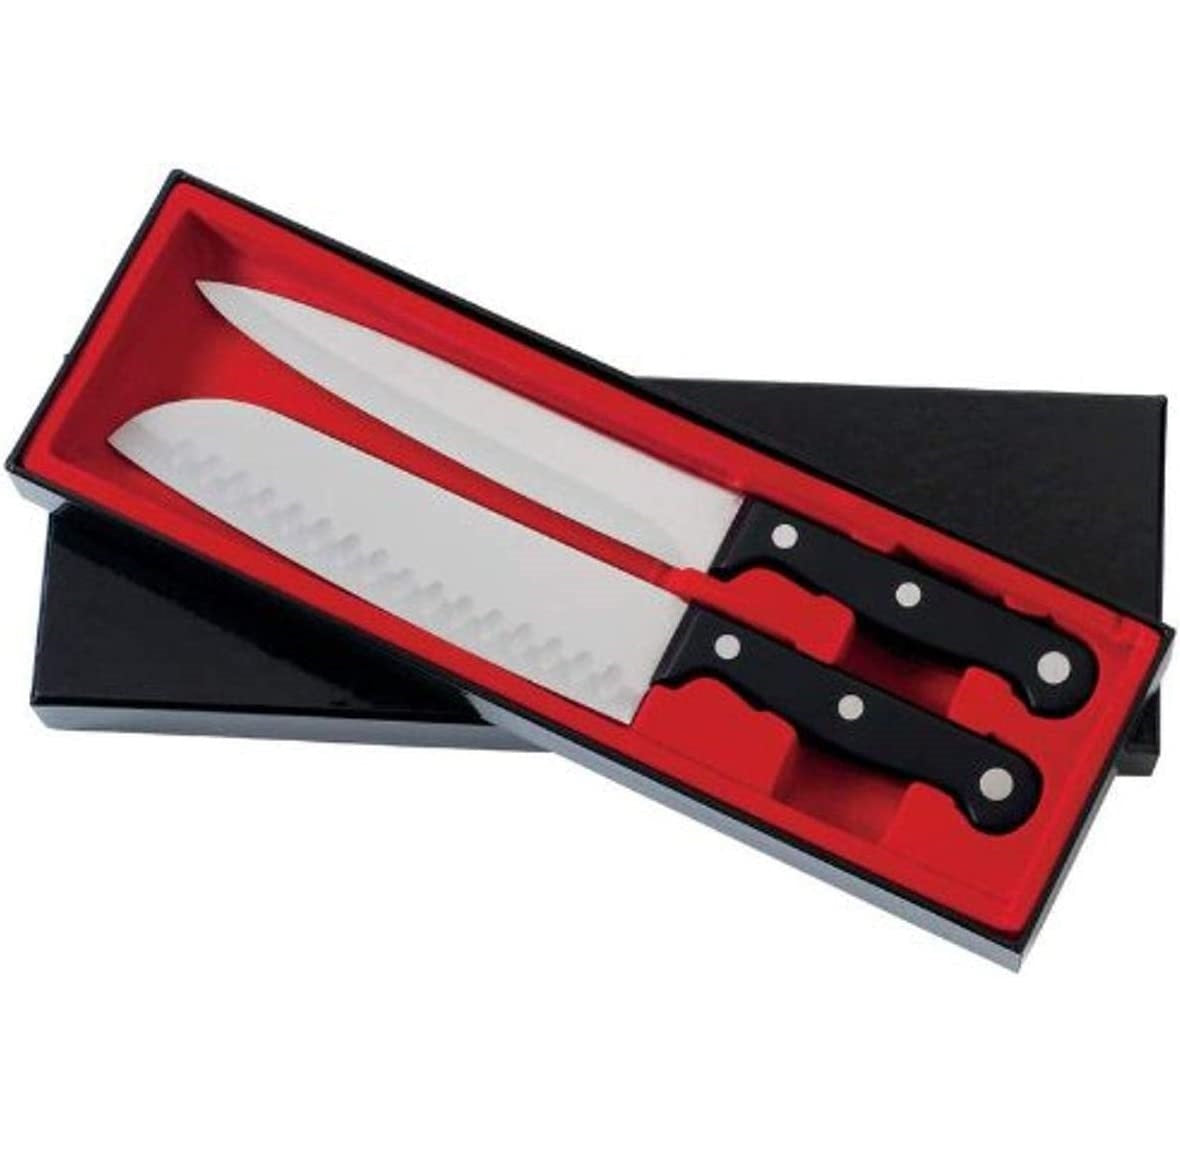 2-Piece COMMERCIAL KNIFE SET Full Tang Phenolic Handles - Gift Box – Health  Craft